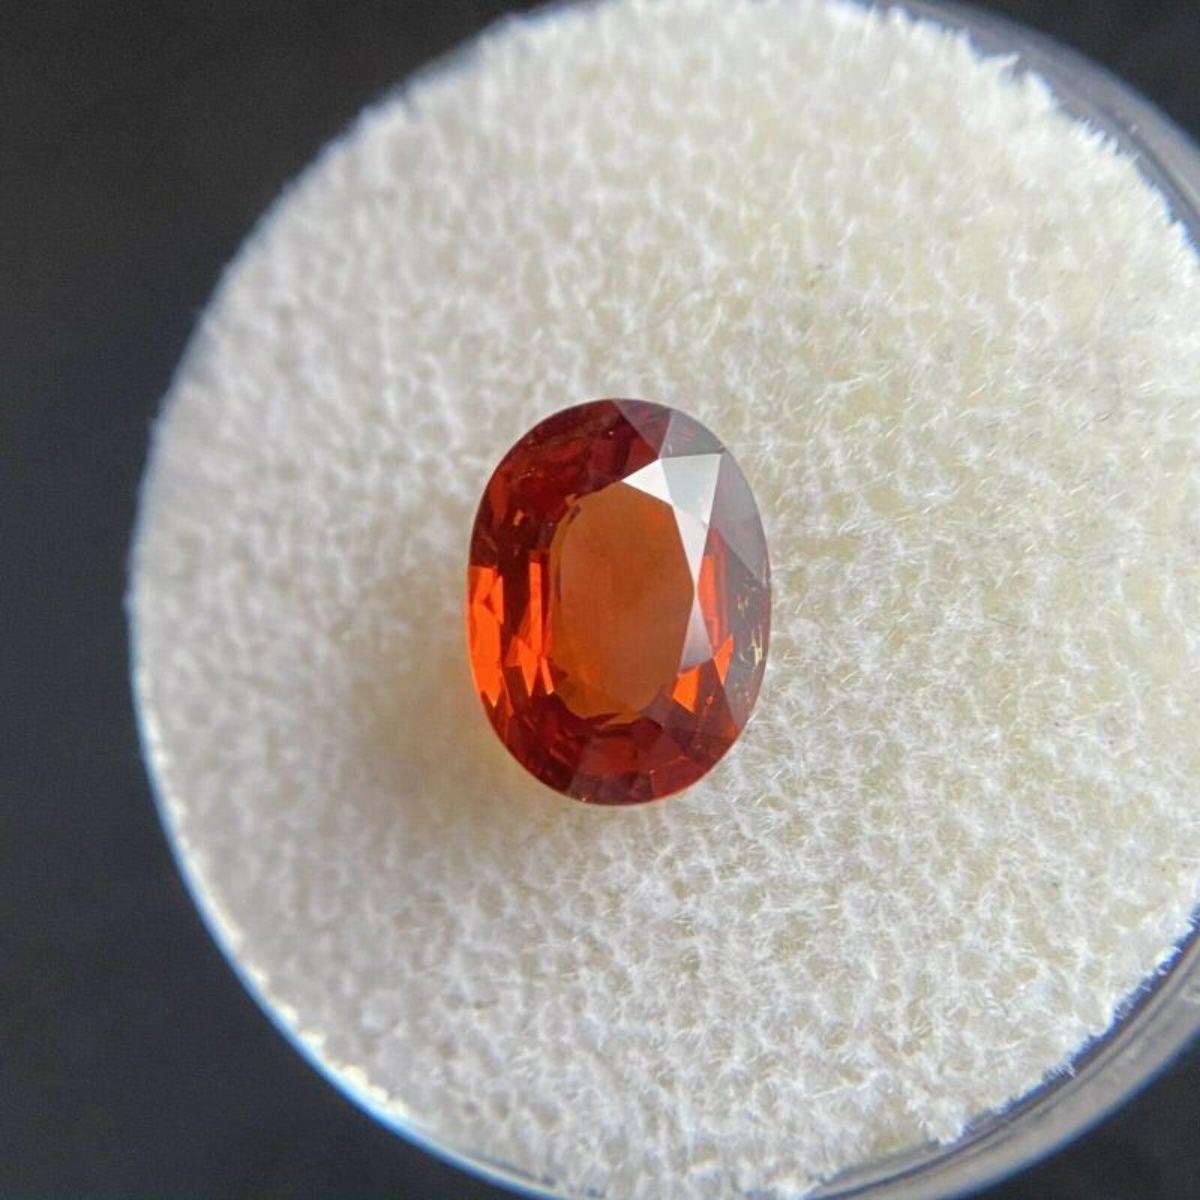 2.17ct Vivid Orange Red Spessartine Garnet Oval Cut Loose Gem 9 x 7mm Jewel

Natural Spessartine Garnet Loose Gemstone 
2.17 Carat with a beautiful reddish orange colour and good clarity. Some small natural inclusions visible when looking closely,